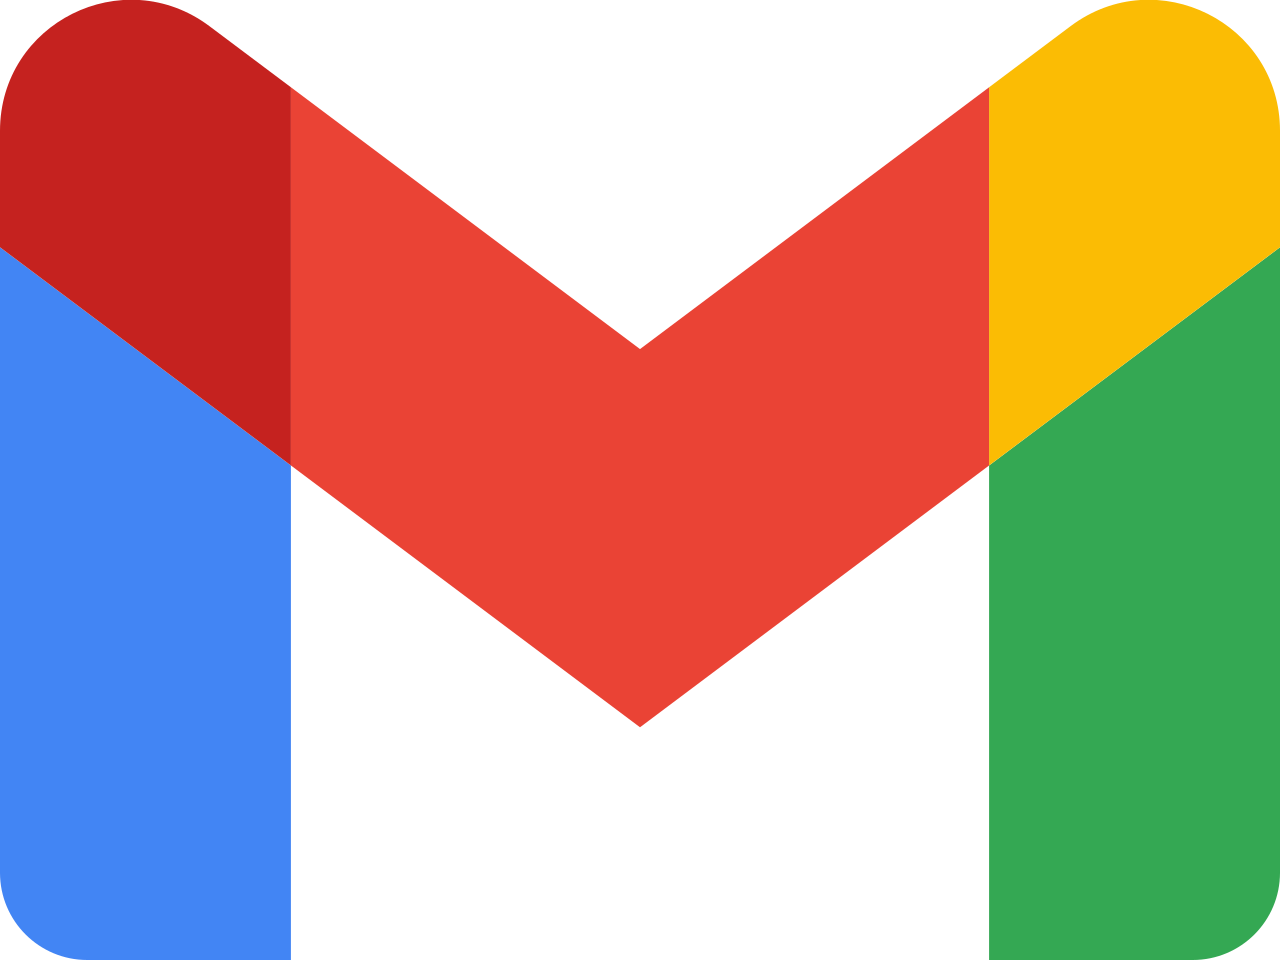 Gmail logo, the email service by Google.